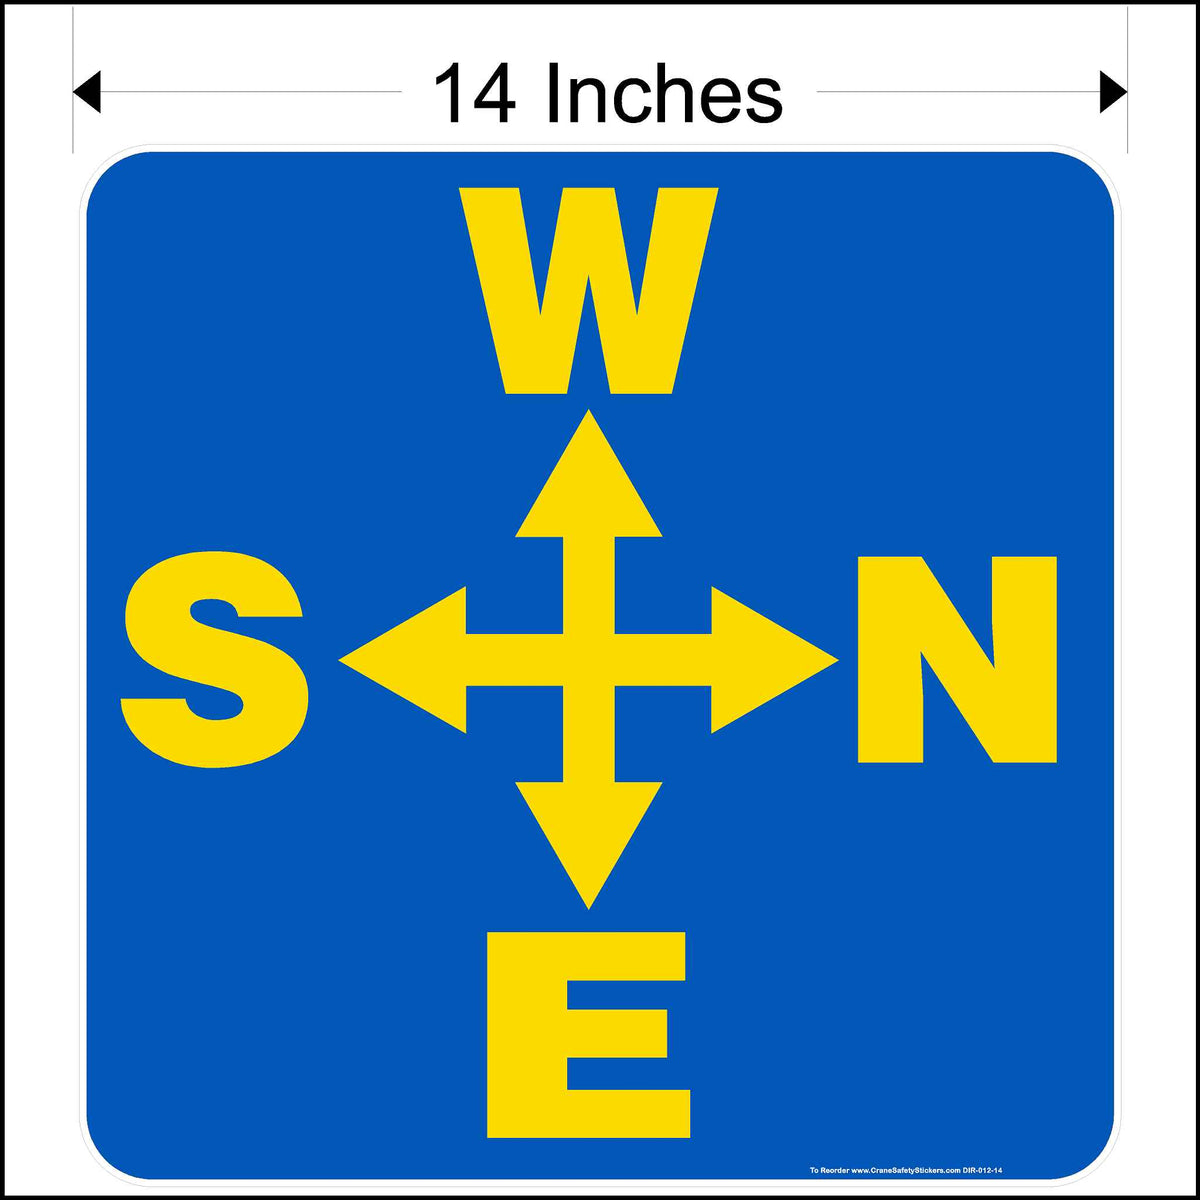 14 Inch overhead crane directional decal for the side of the crane. West, North, East, and South Arrows printed in yellow on blue background.